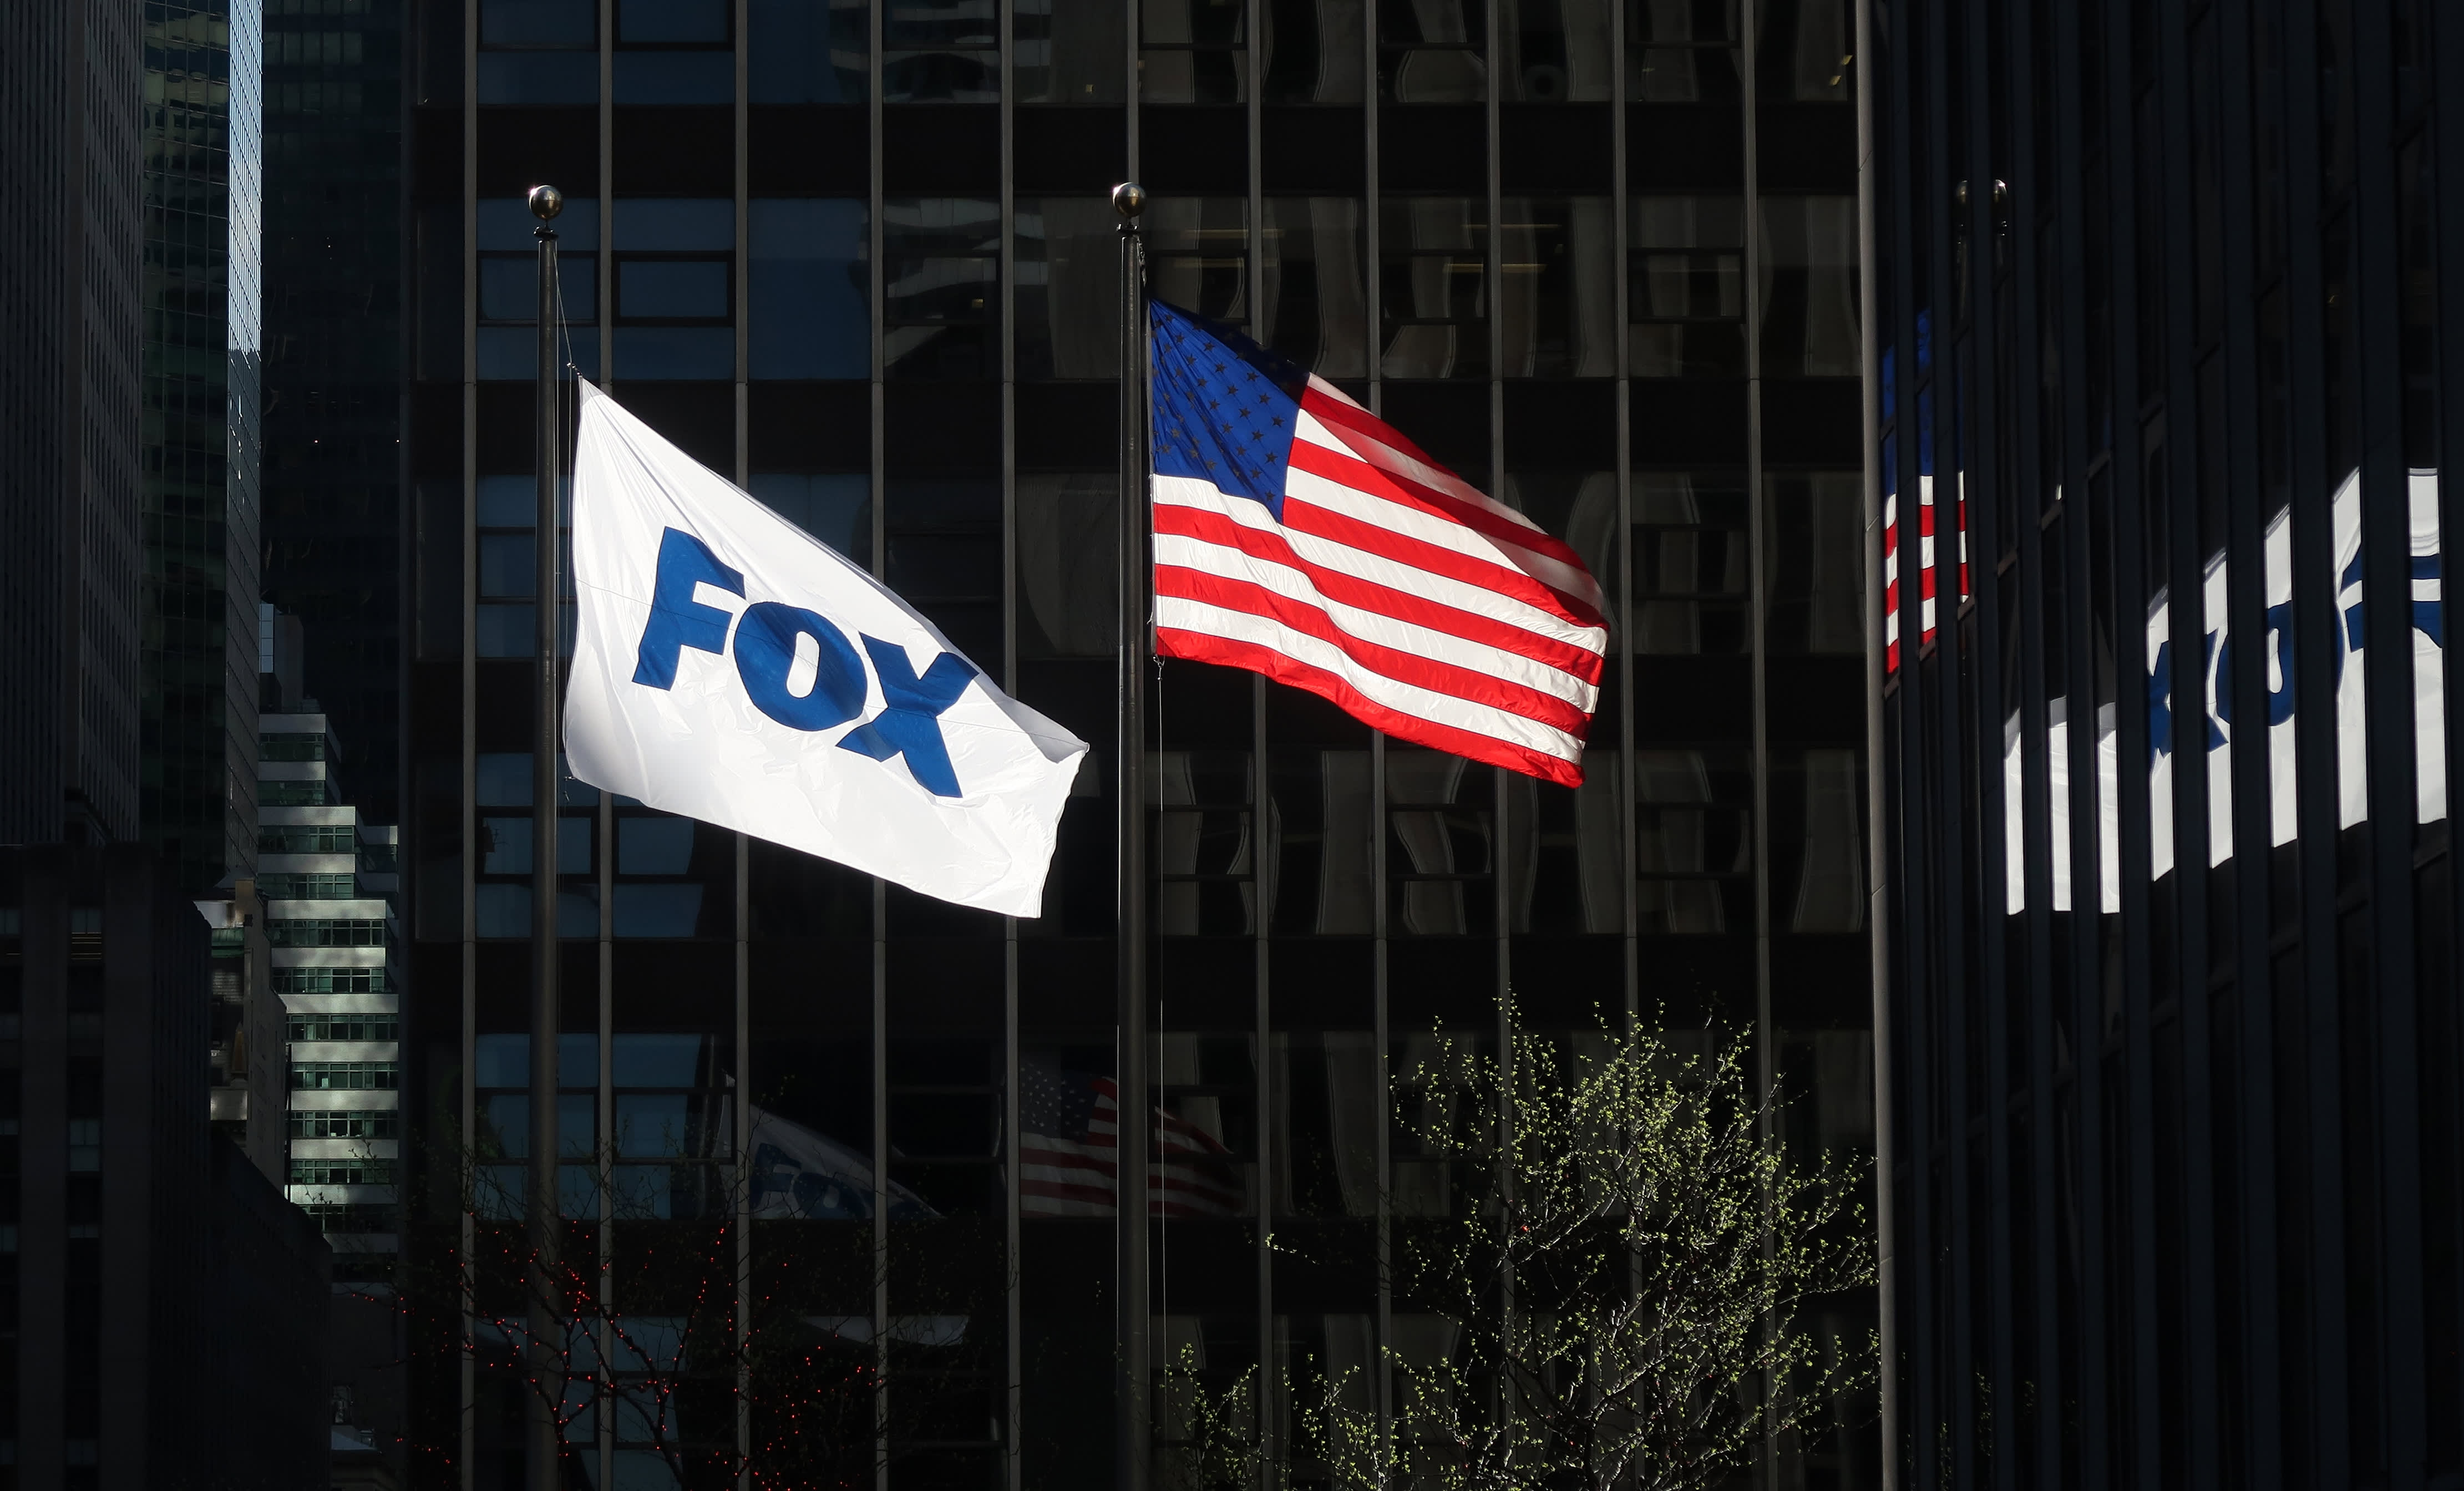 Wells Fargo downgrades Fox, citing cord cutting and growing sports rights costs